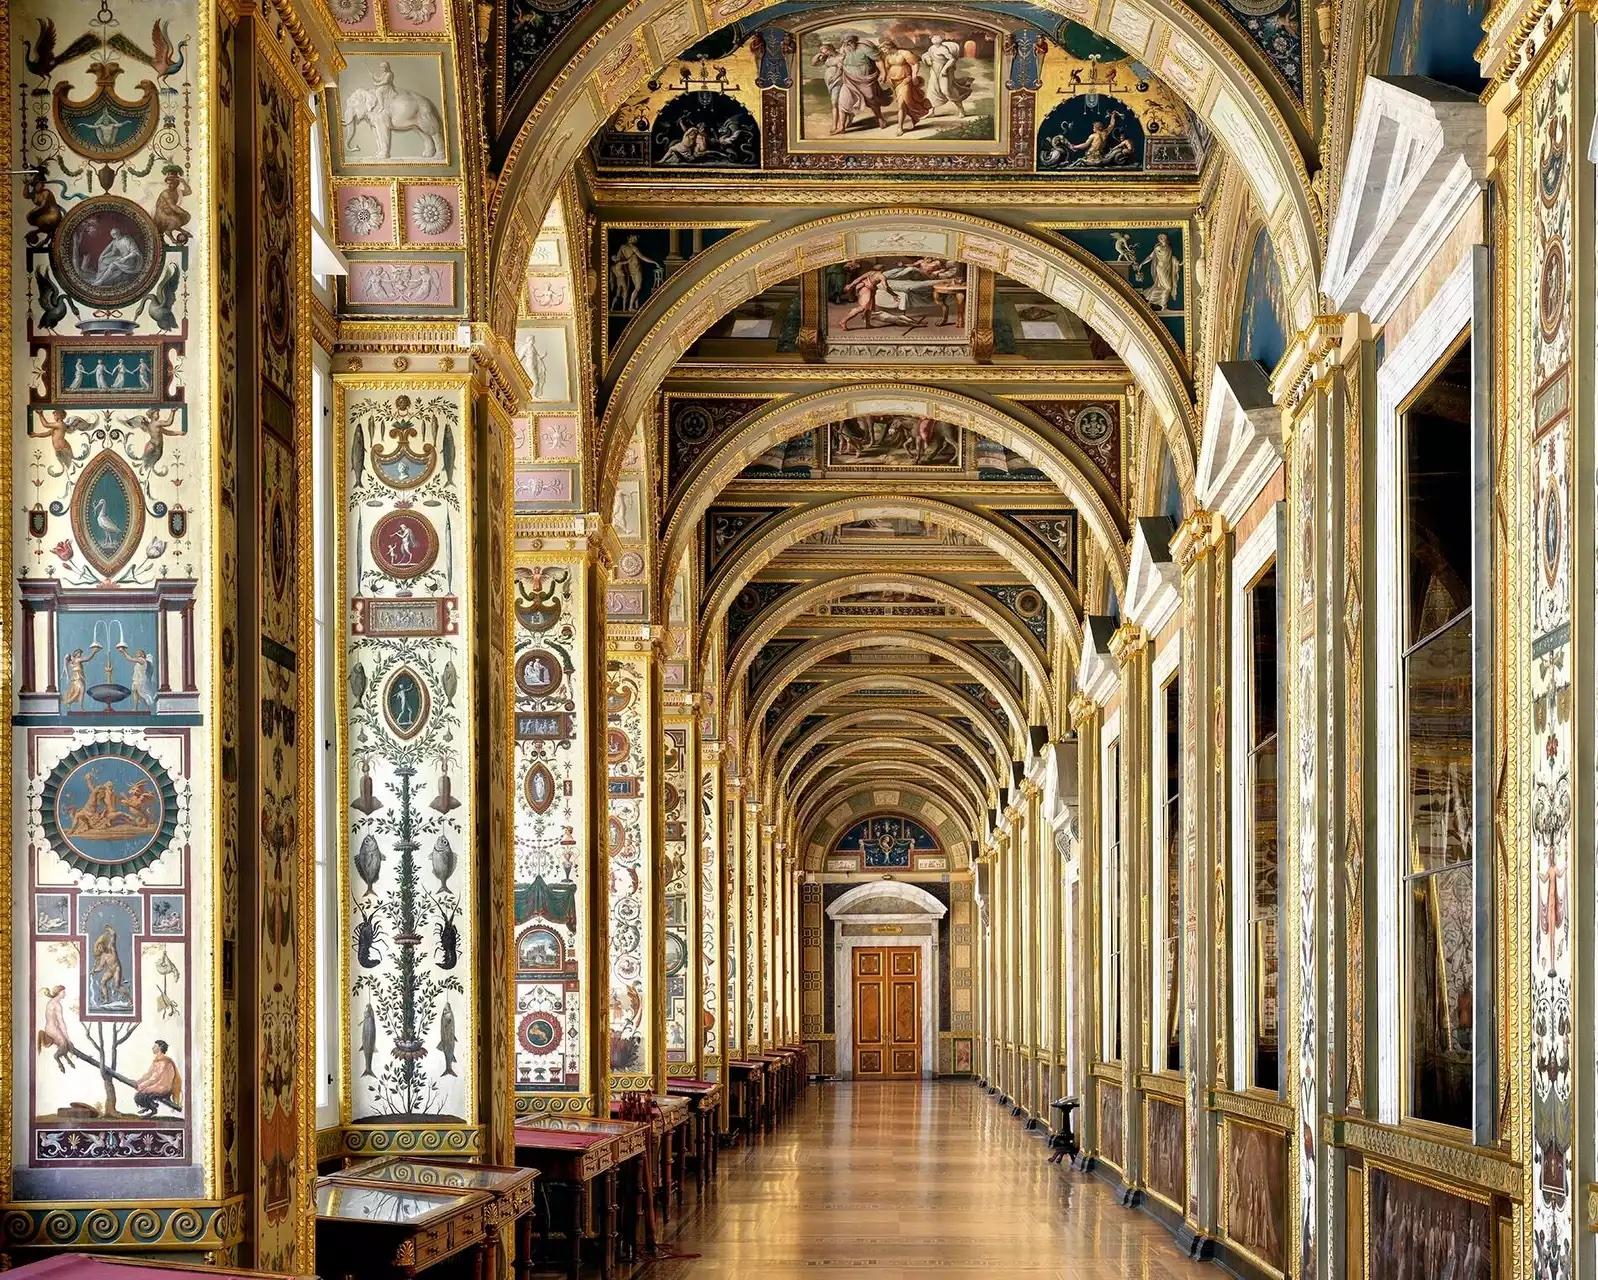 Palazzo Ducale Mantova
2017
C print
39.5 x 47.5 inches - edition of 5
47.5 x 59 inches - edition of 5
71 x 88.5 inches - edition of 5

Massimo Listri is a Florence-based photographer whose work often presents interiors of great architectural and